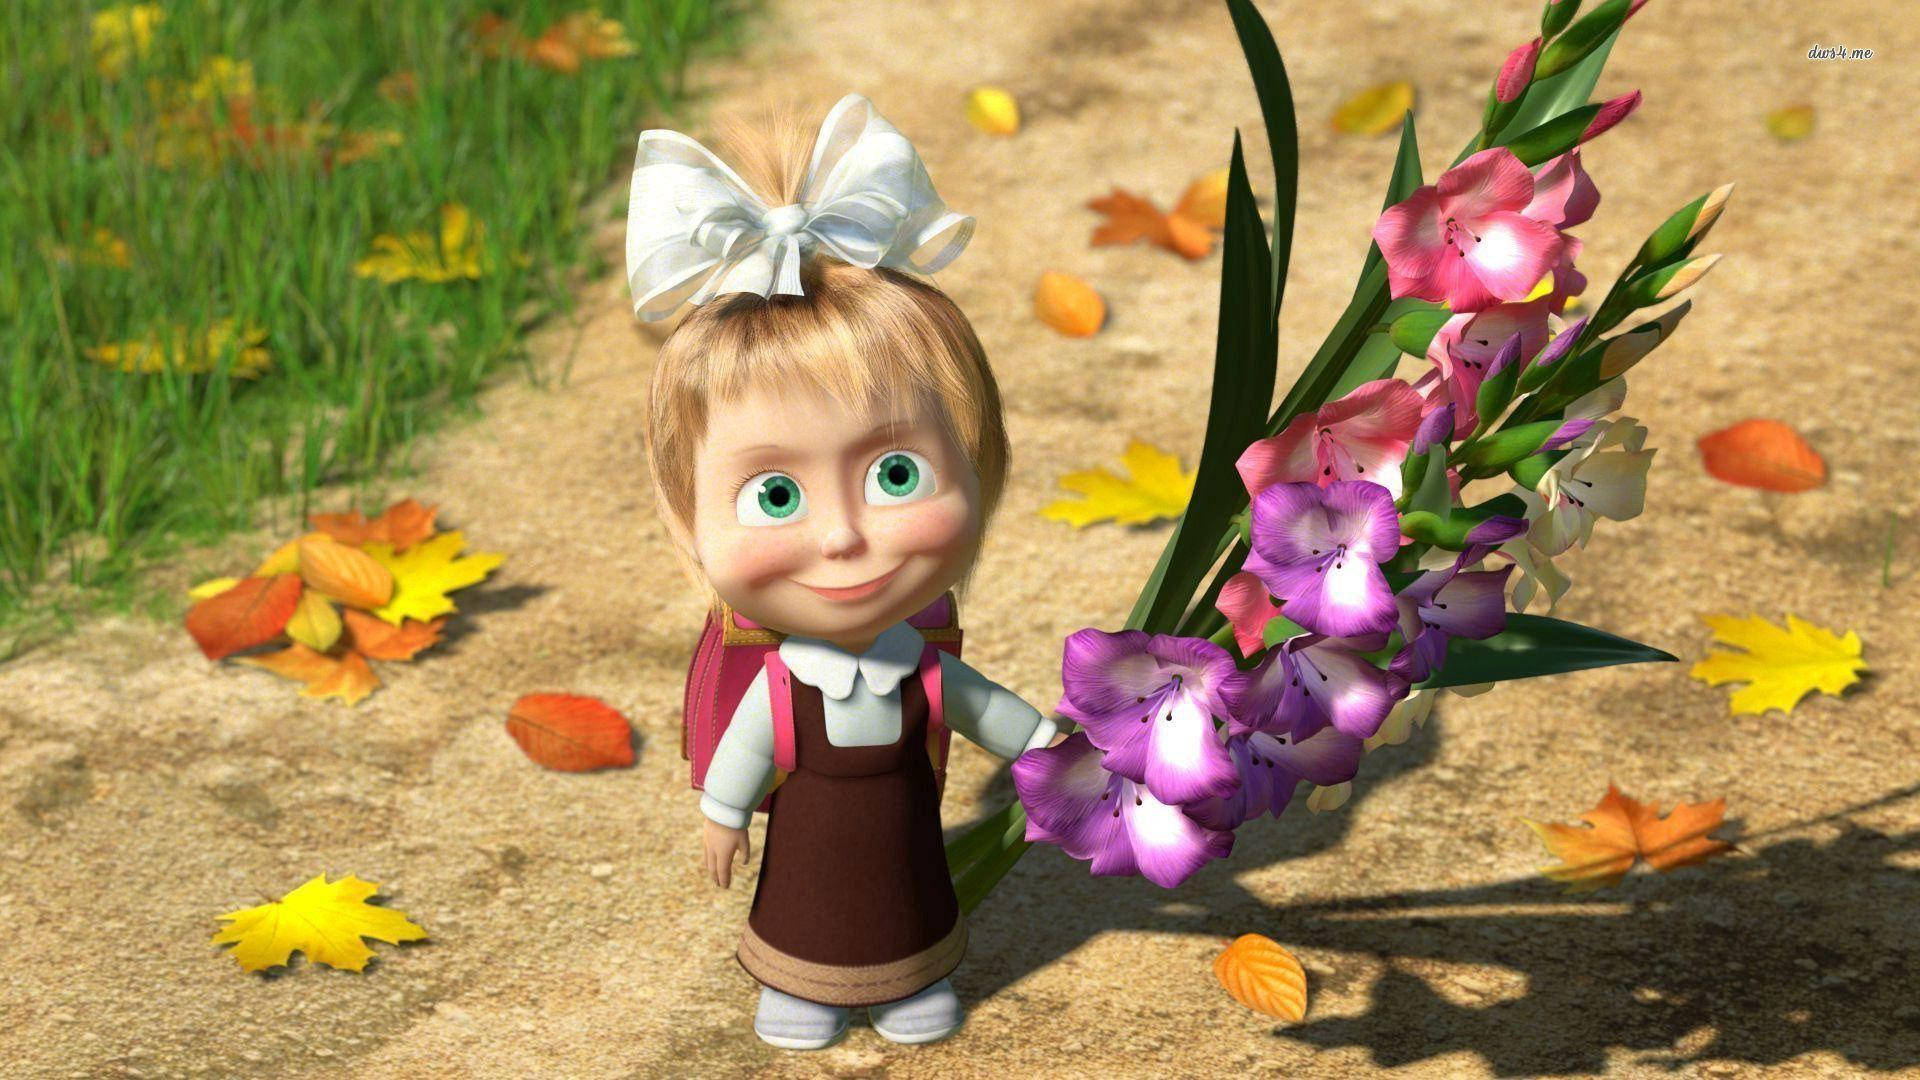 Masha And The Bear With Flowers Wallpaper